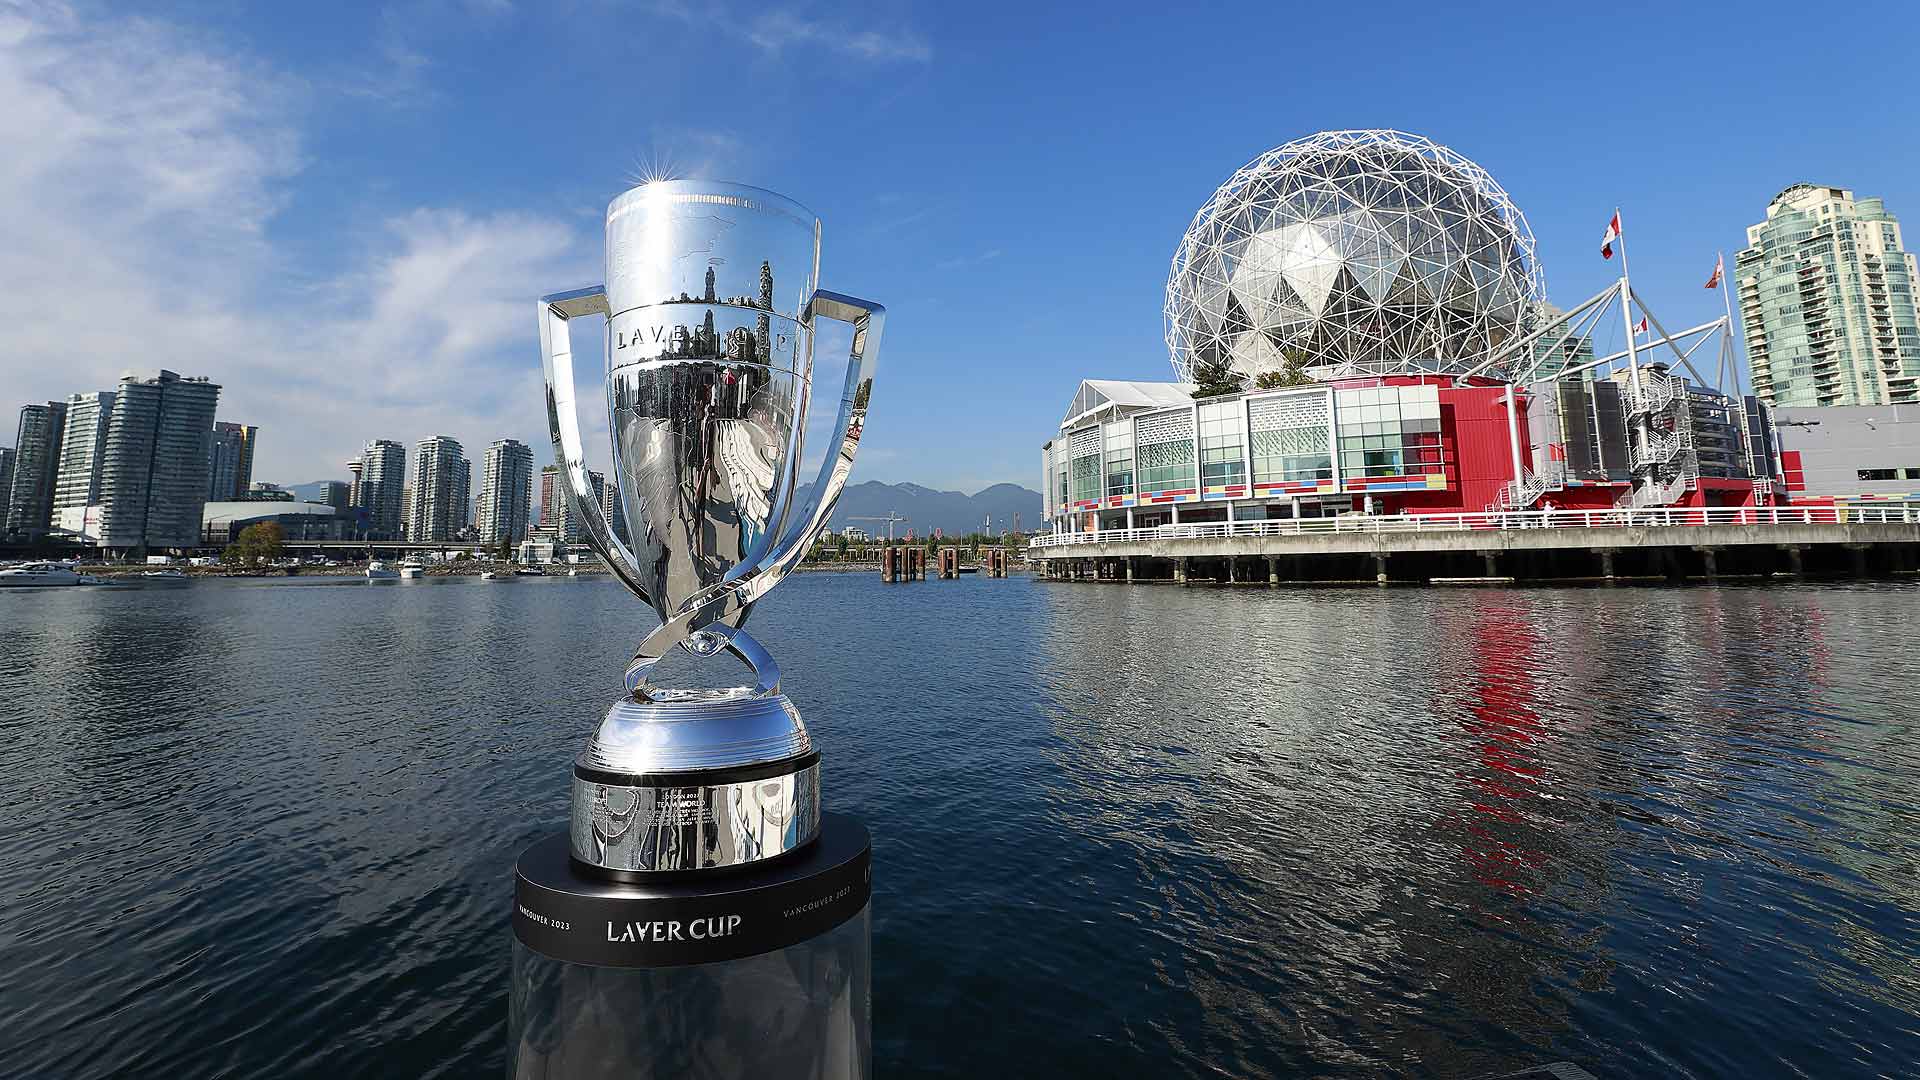 The Laver Cup will be held at Vancouver's Rogers Arena from 22-24 September.